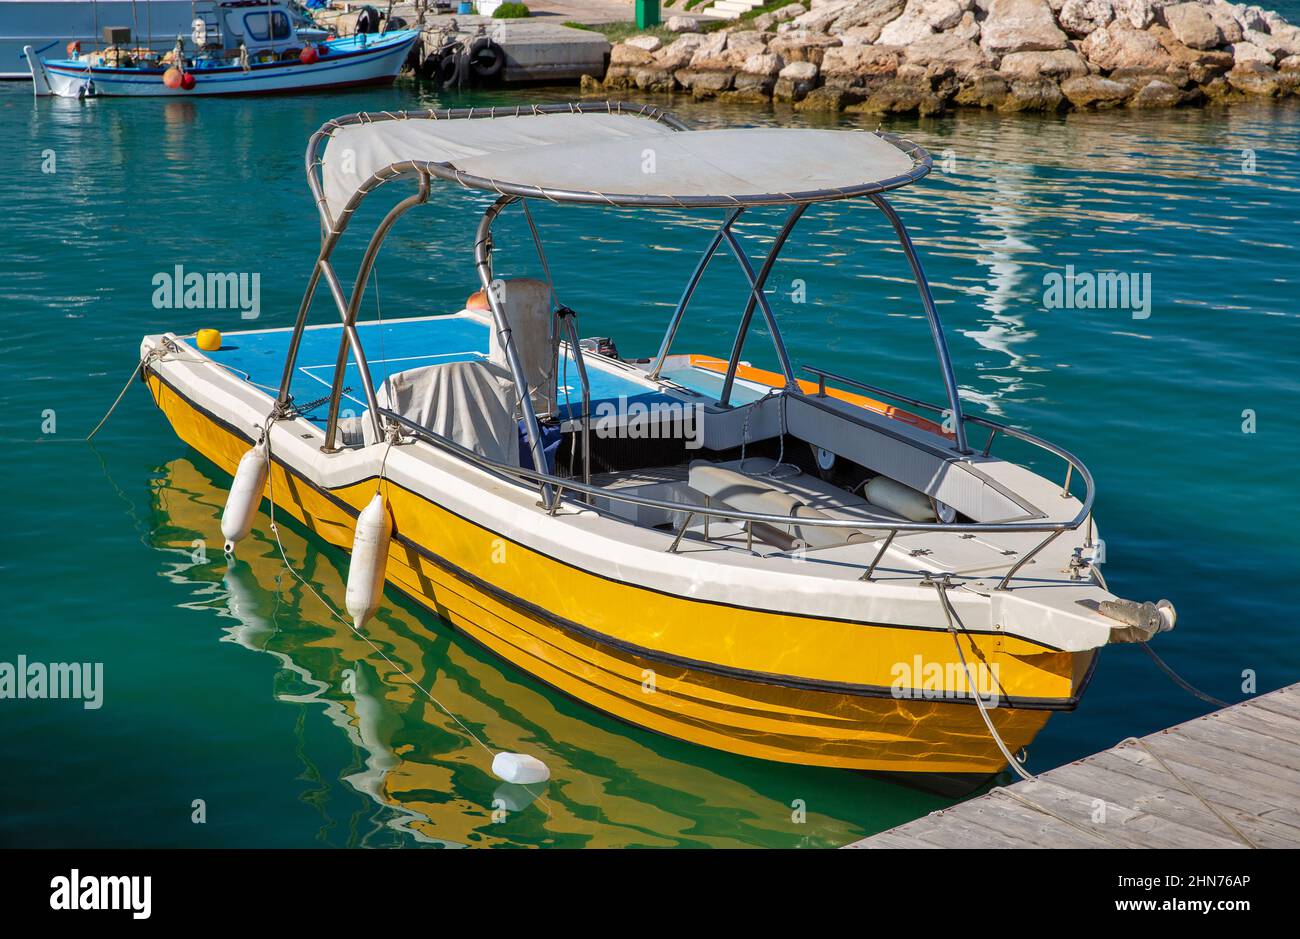 Fishing boat closeup in seaport. Ayia Napa is a tourist resort at the far eastern end of the southern coast of Cyprus. Stock Photo